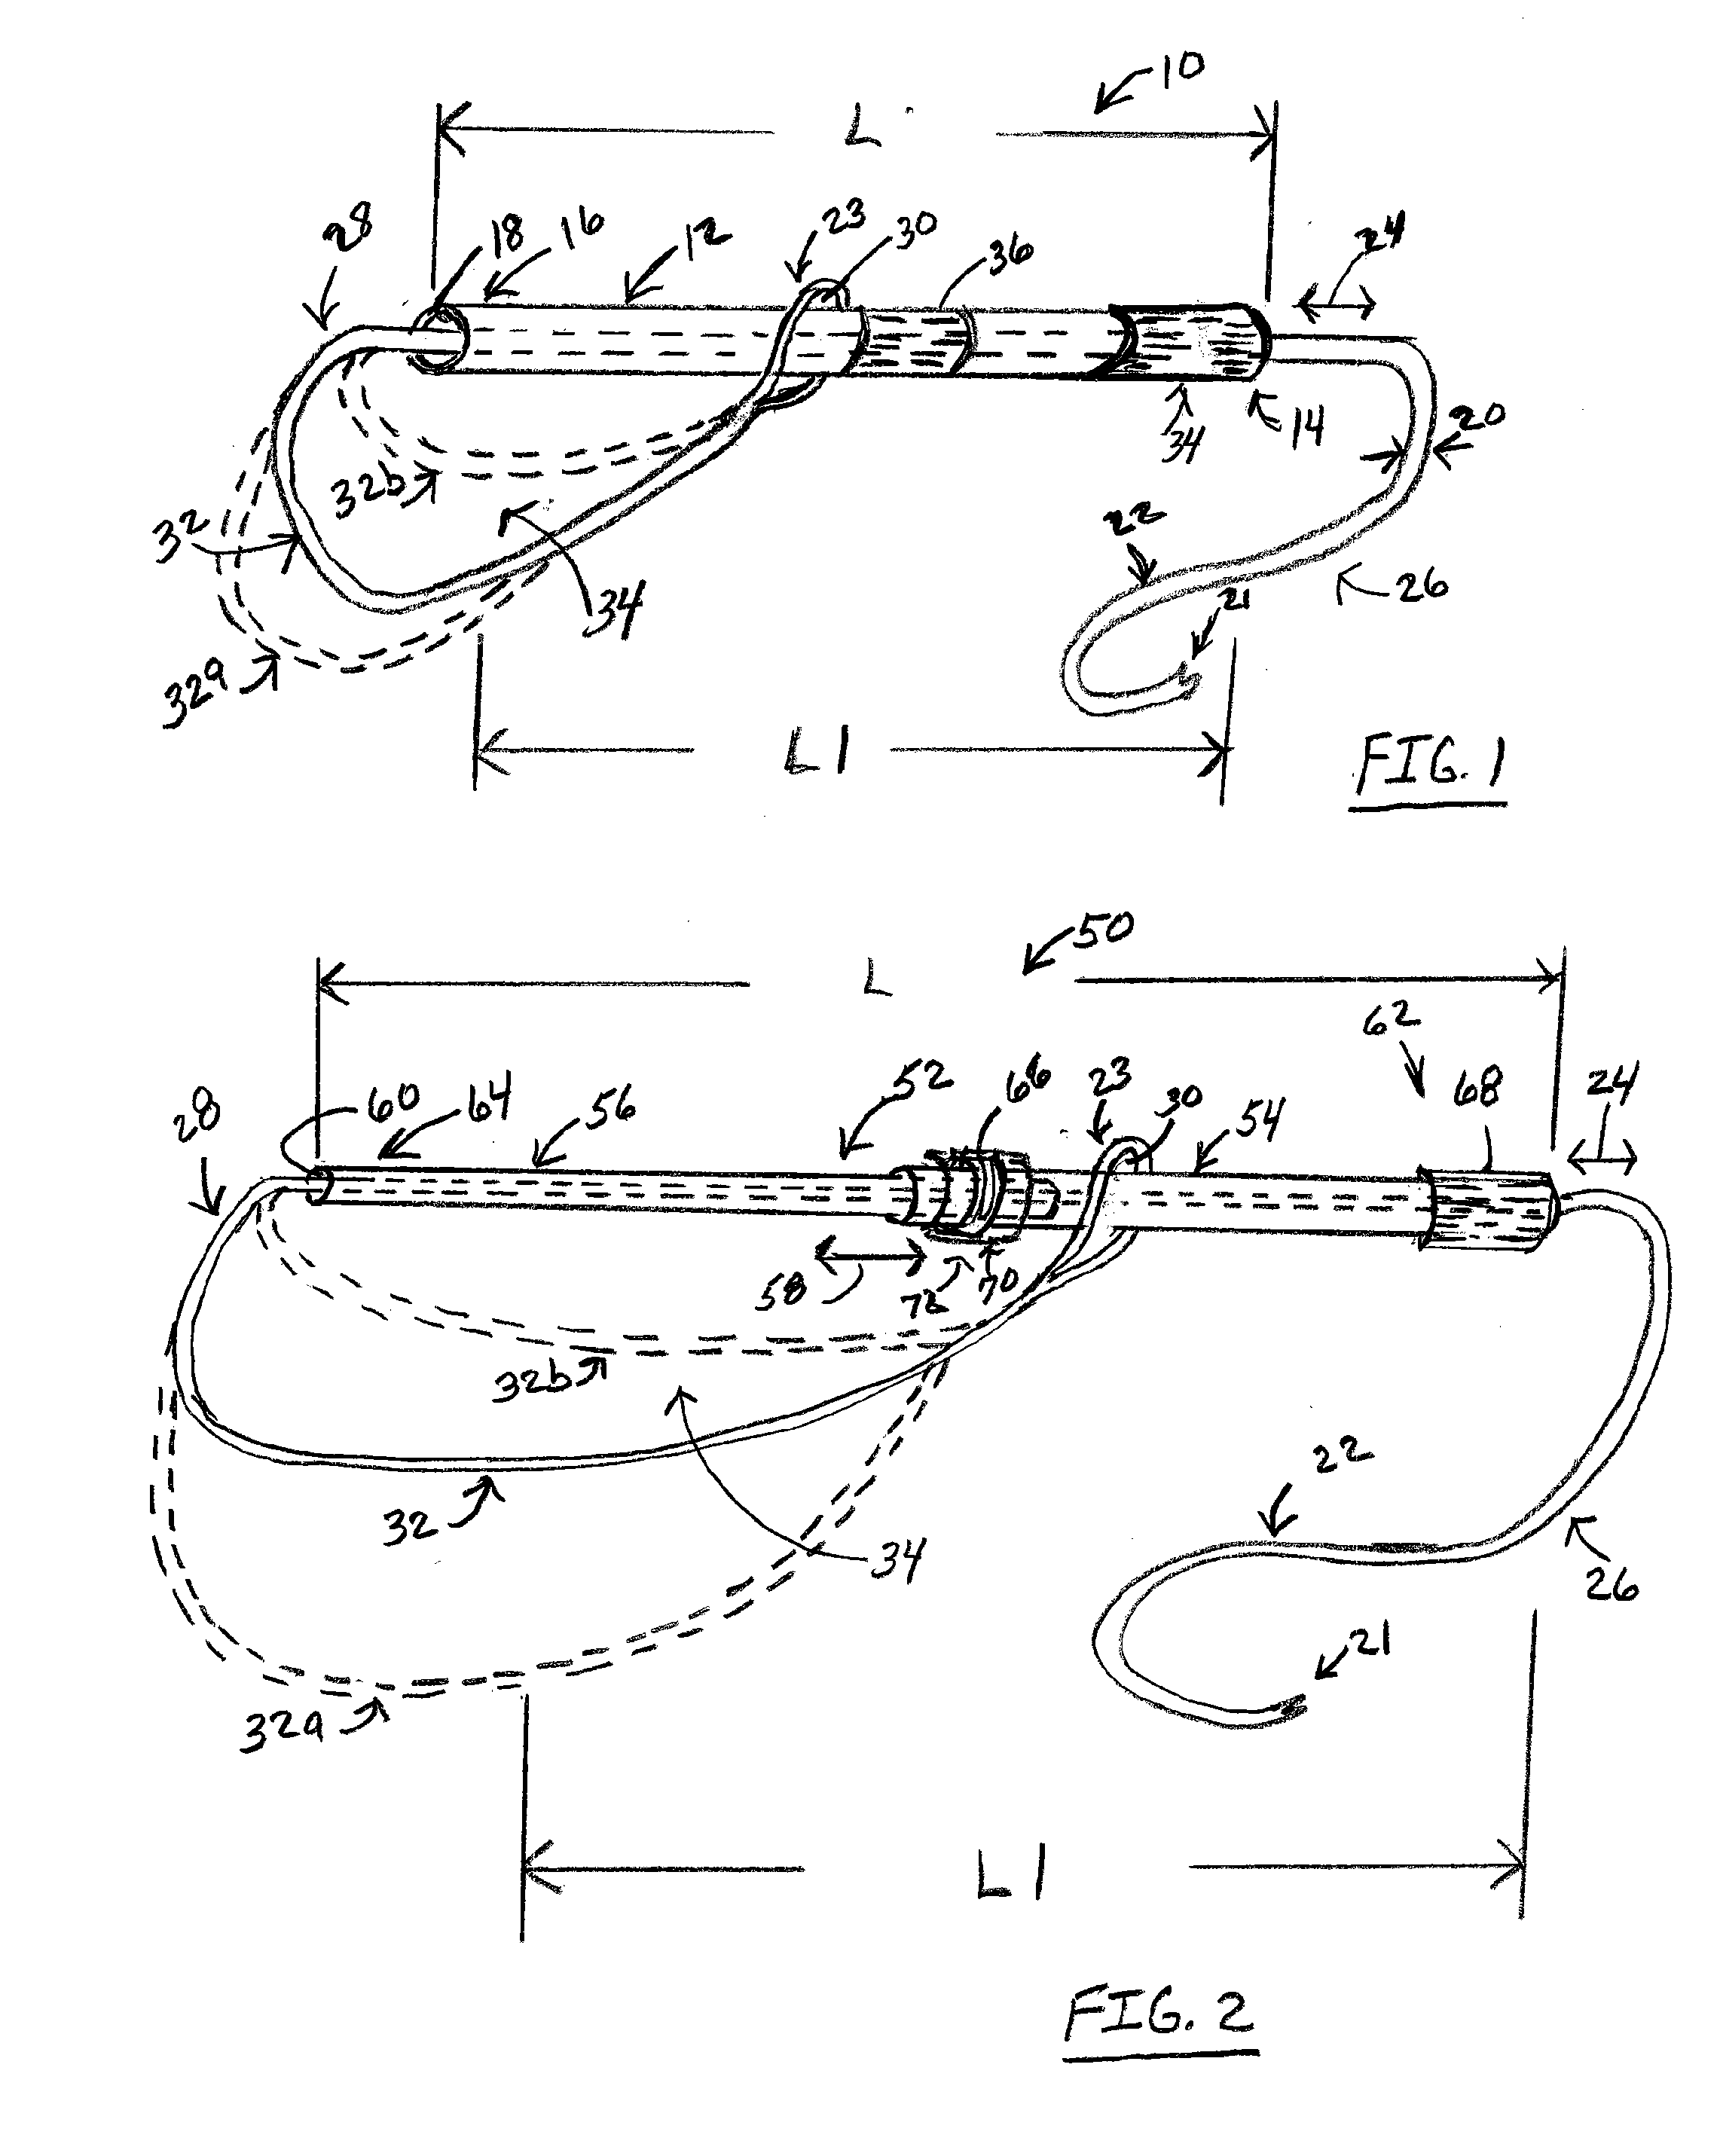 Apparatus and Method for Docking a Boat